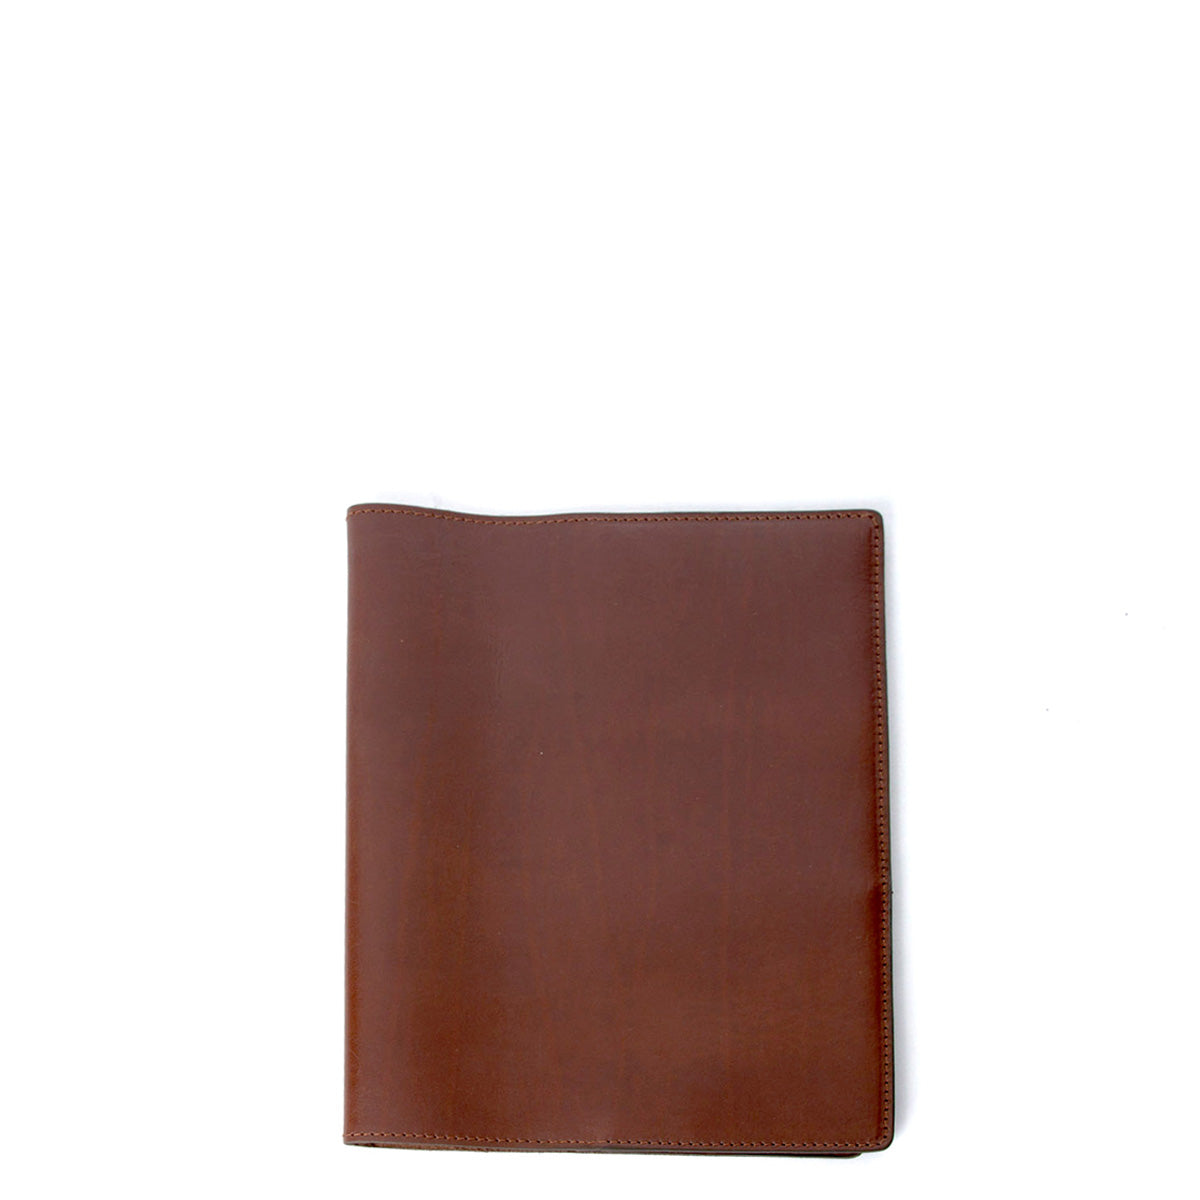 Swags A5 Book Cover - Chocolate